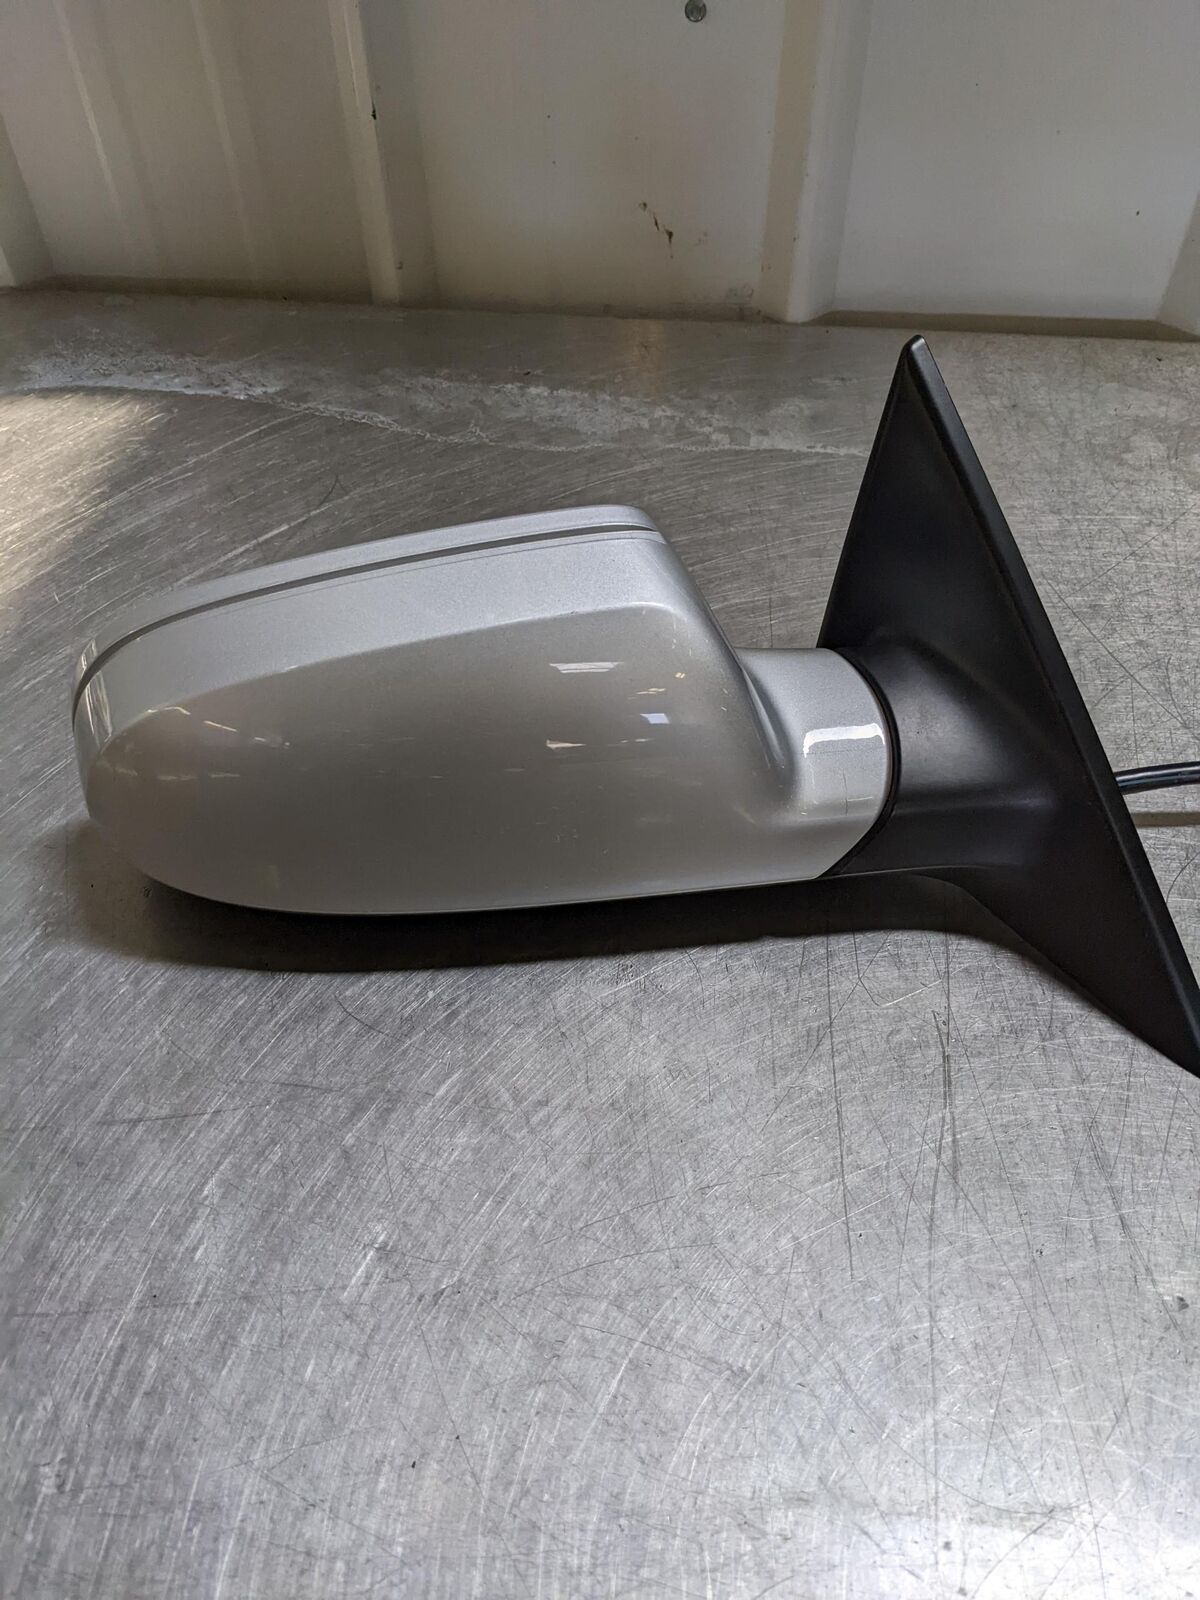 💥08-14 AUDI A5 RH Right Door Mirror Silver Blind Spot Painted Cover💥